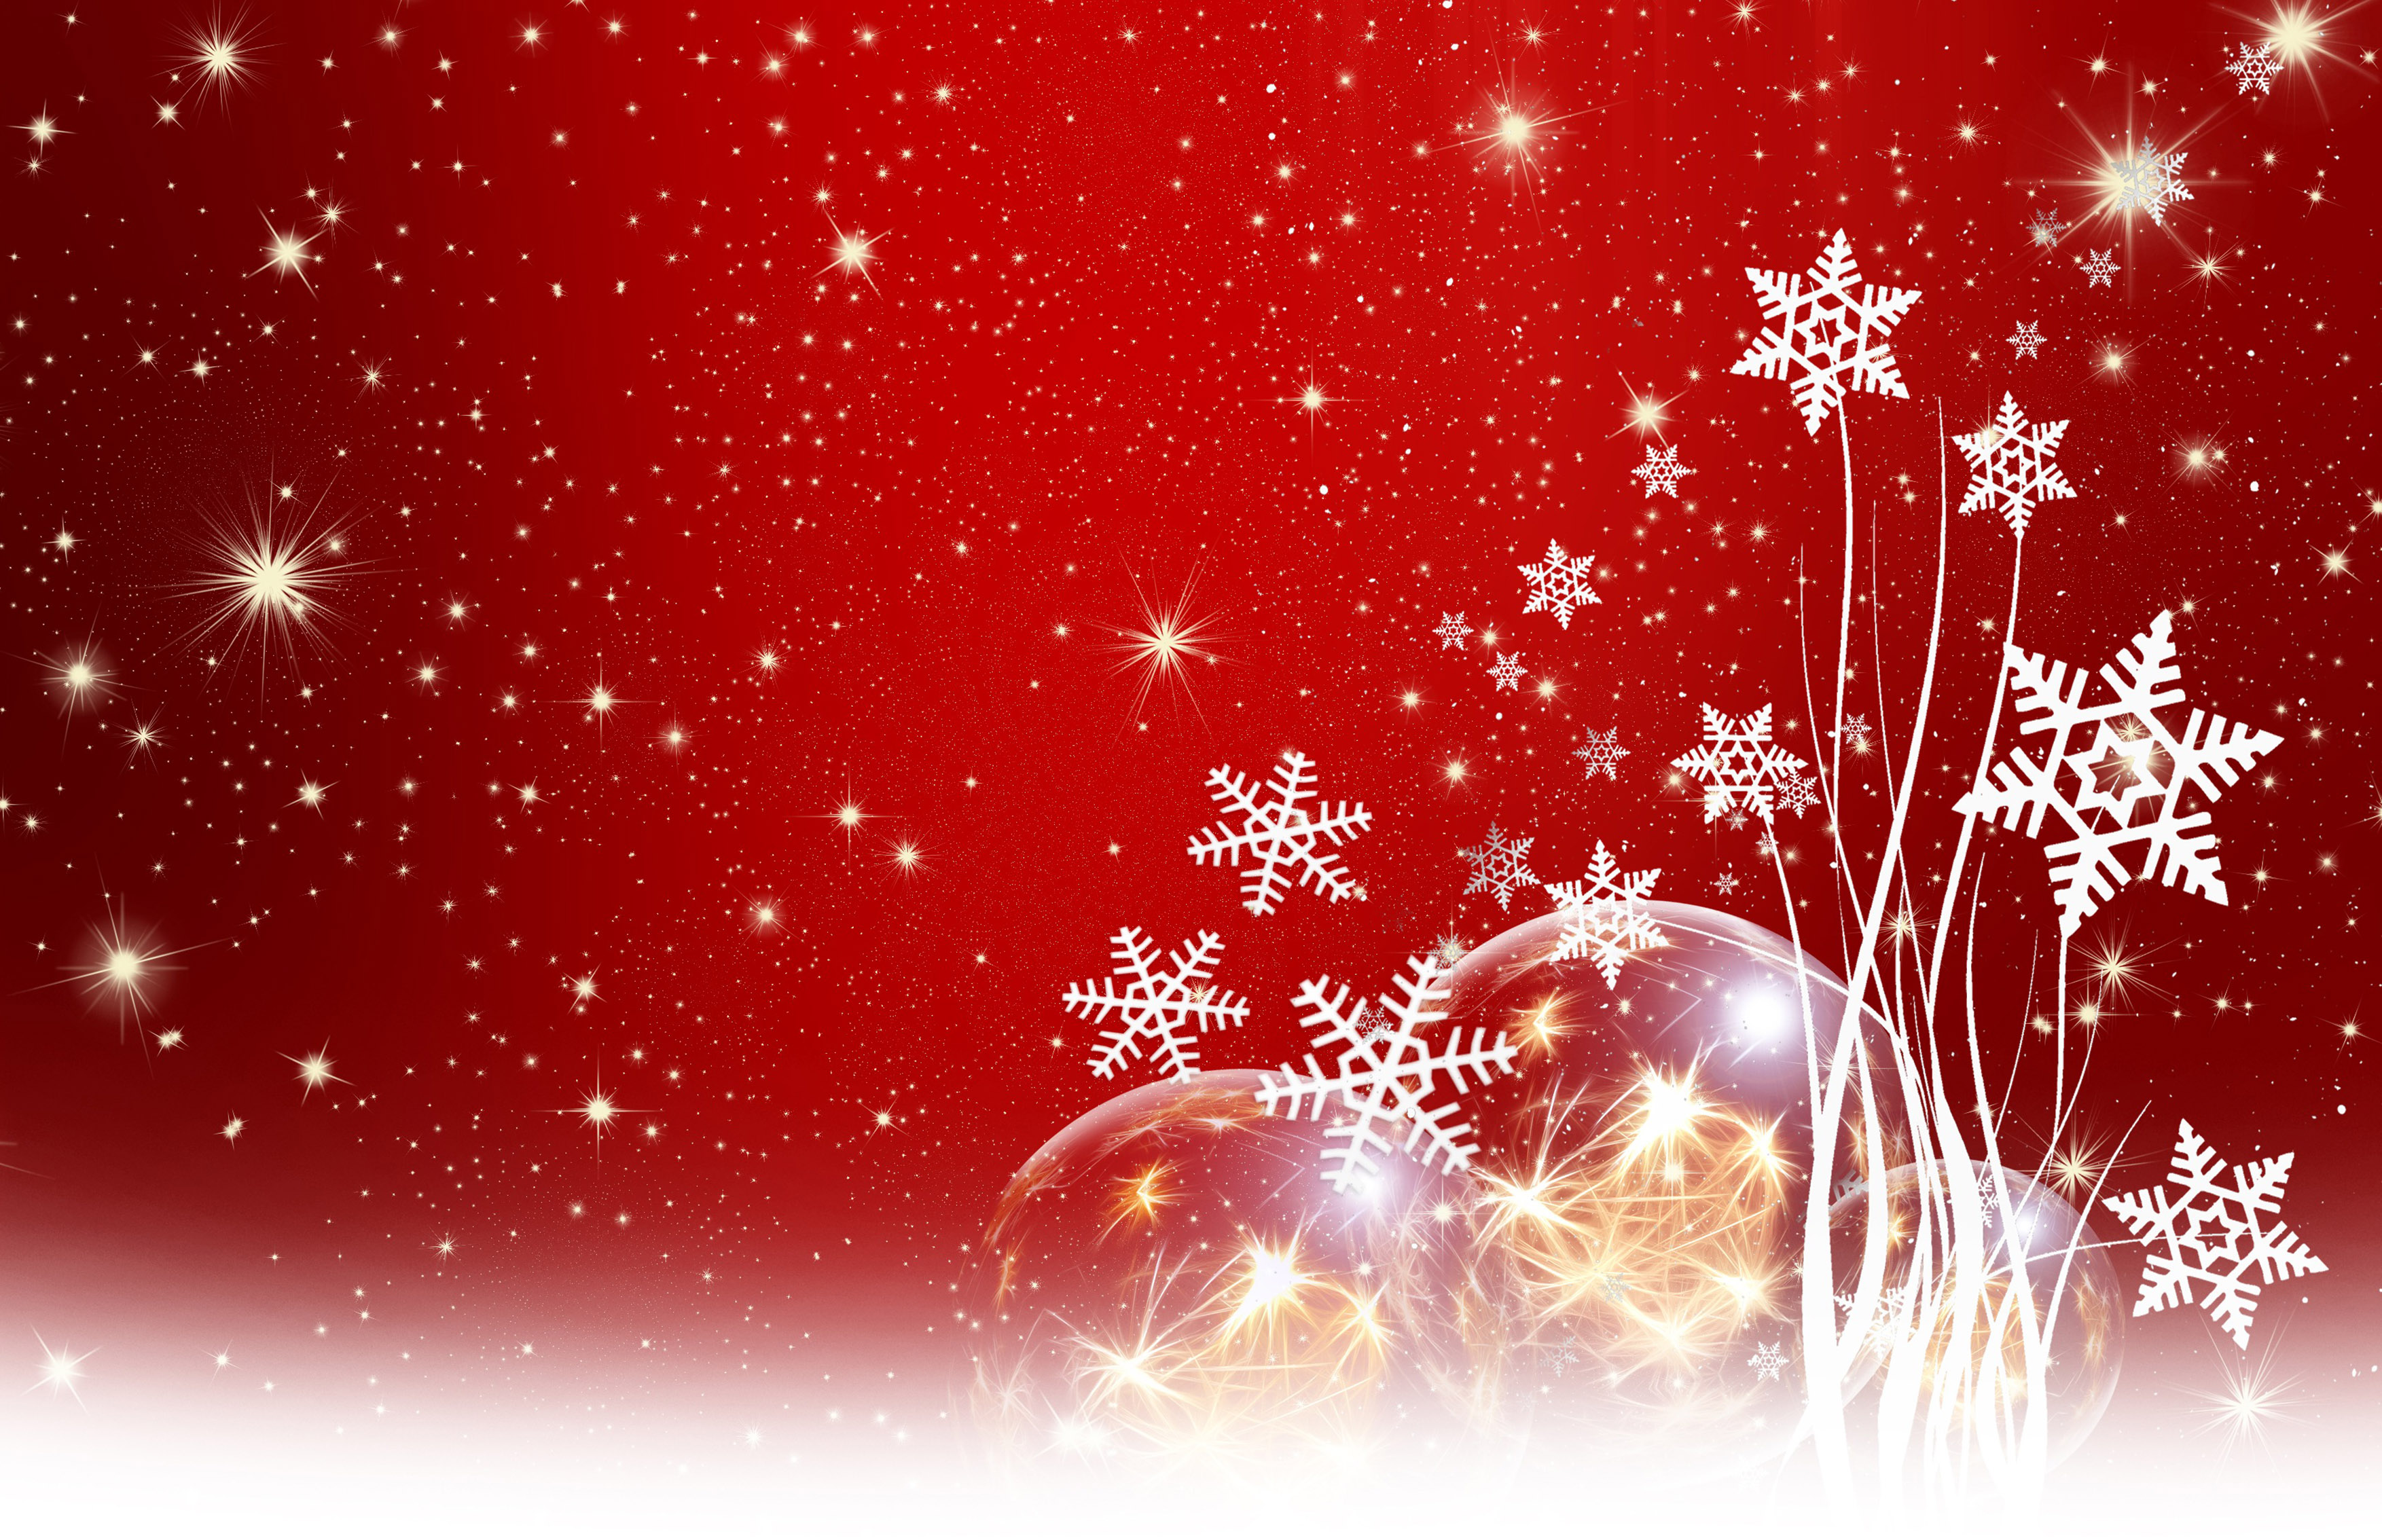 Great Pictures For Christmas Wallpaper Background